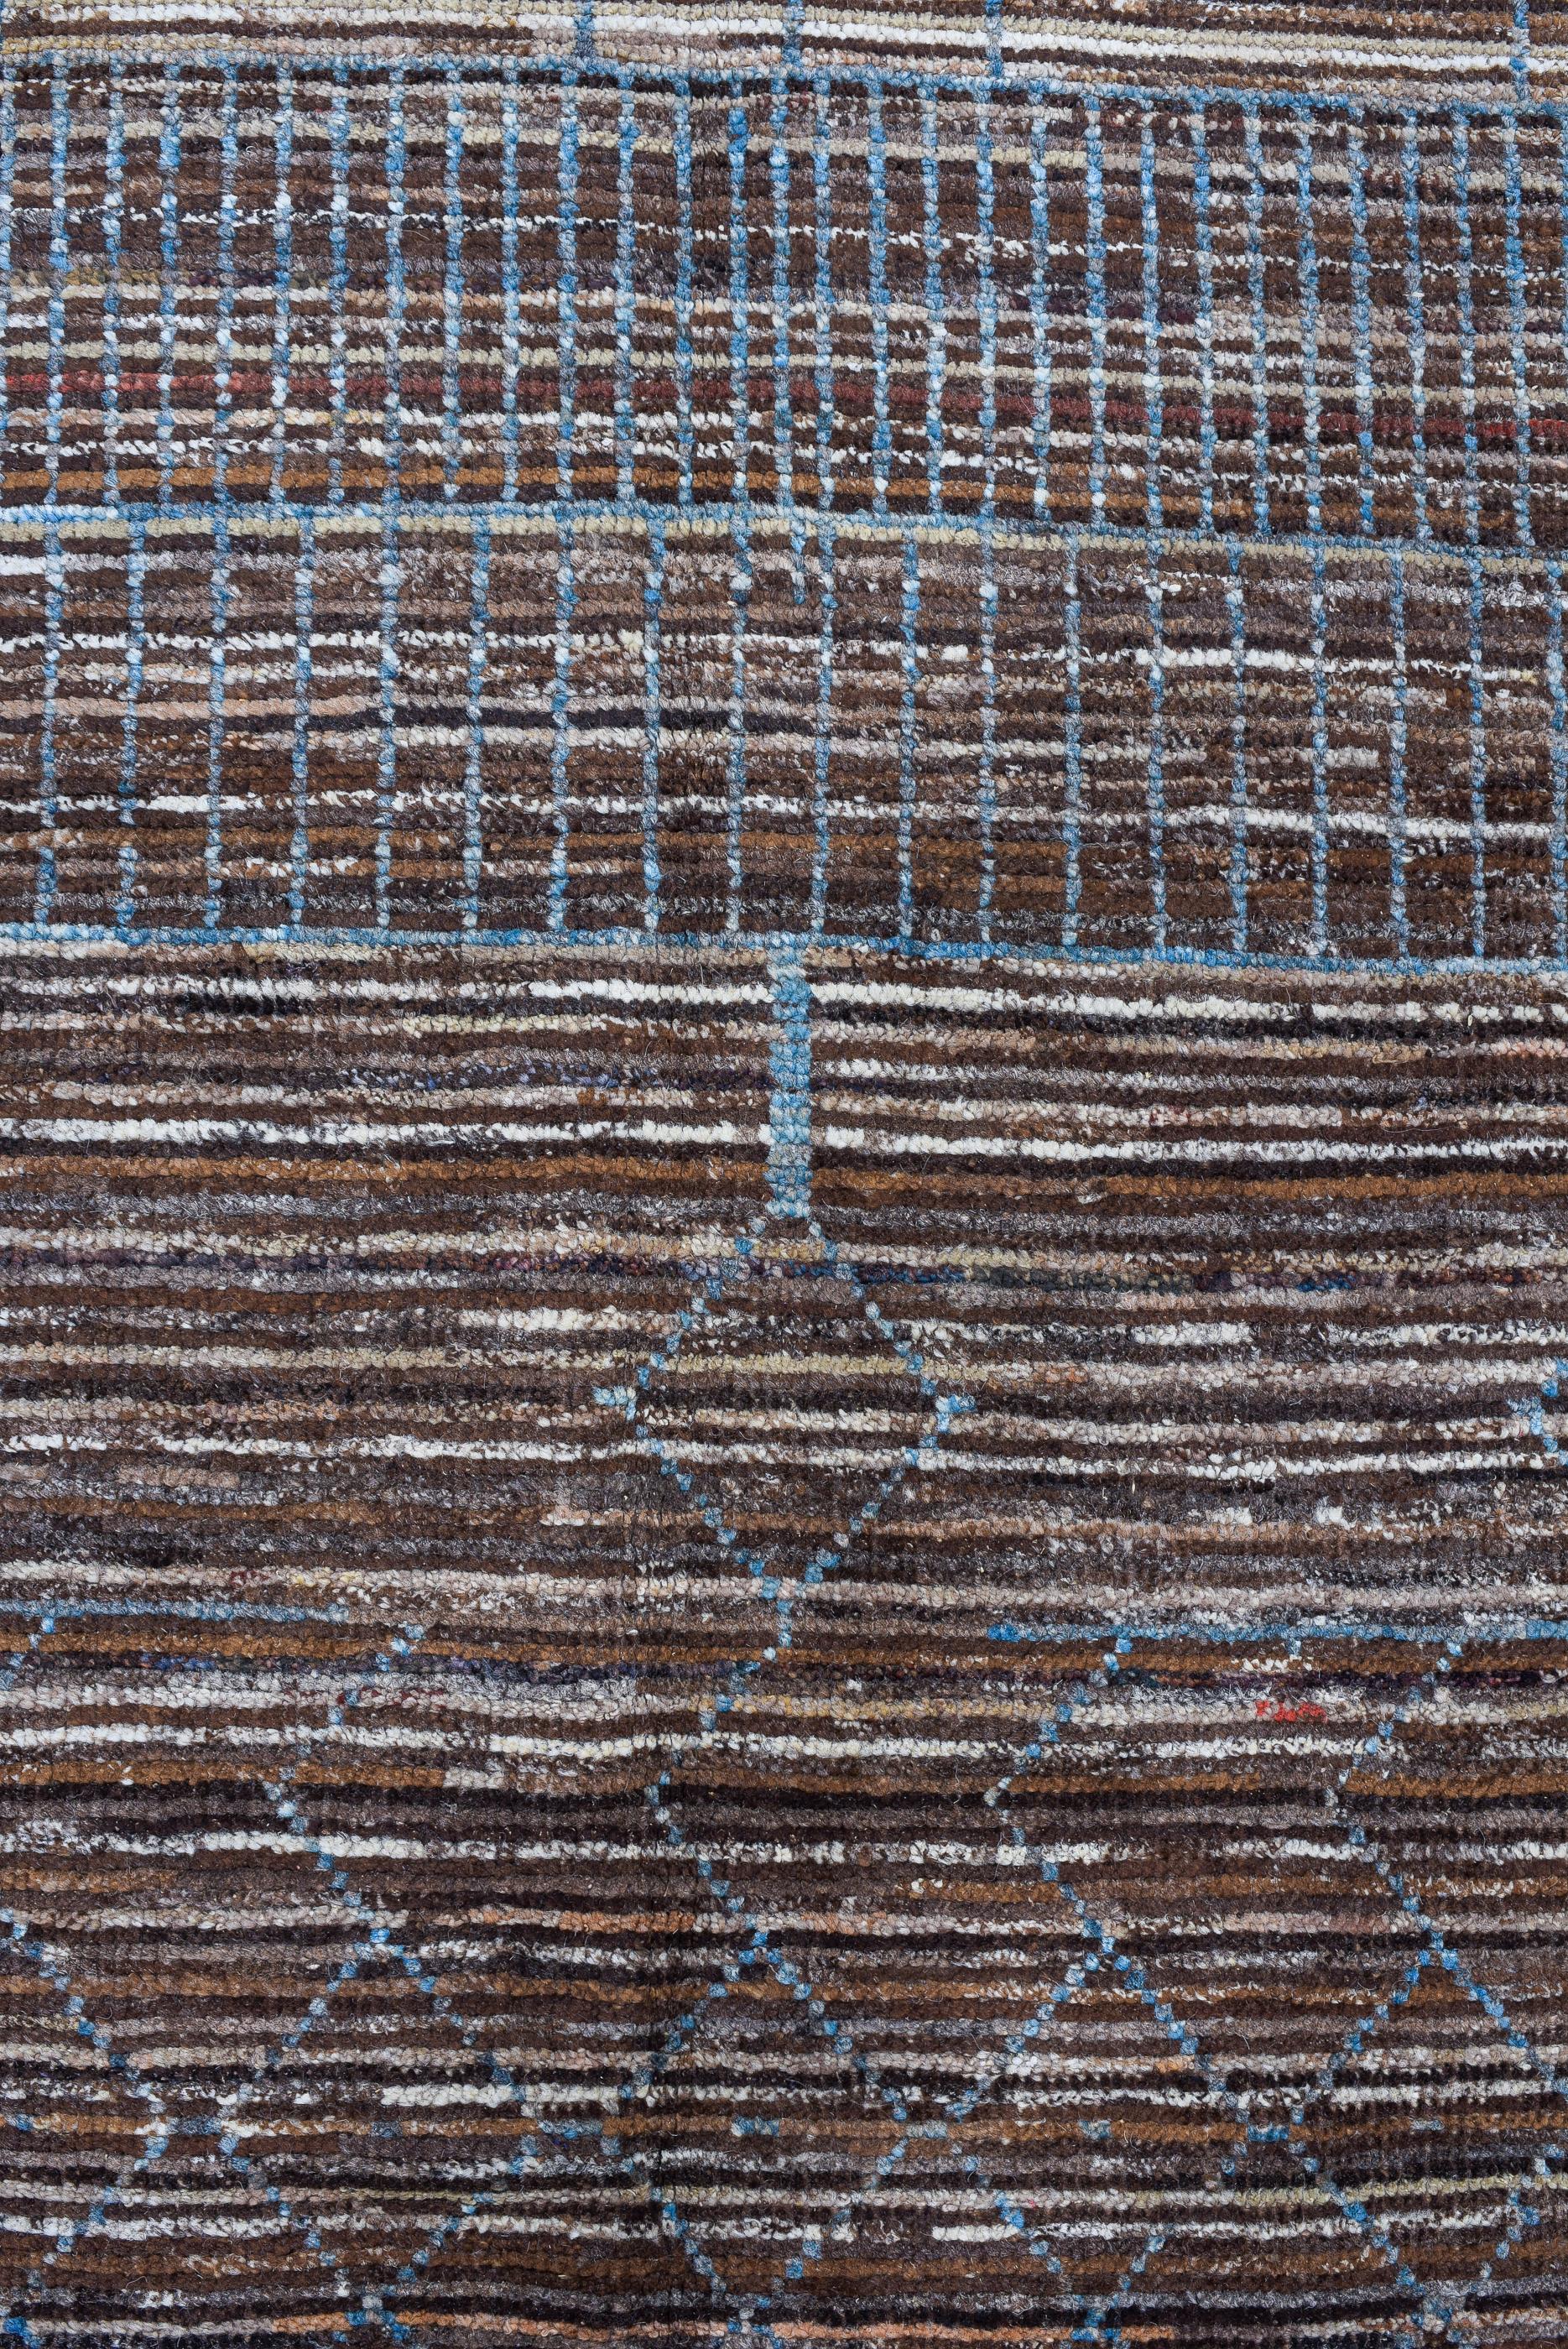 Tulu Azure Blue on Rocky Brown with Village Weavings For Sale